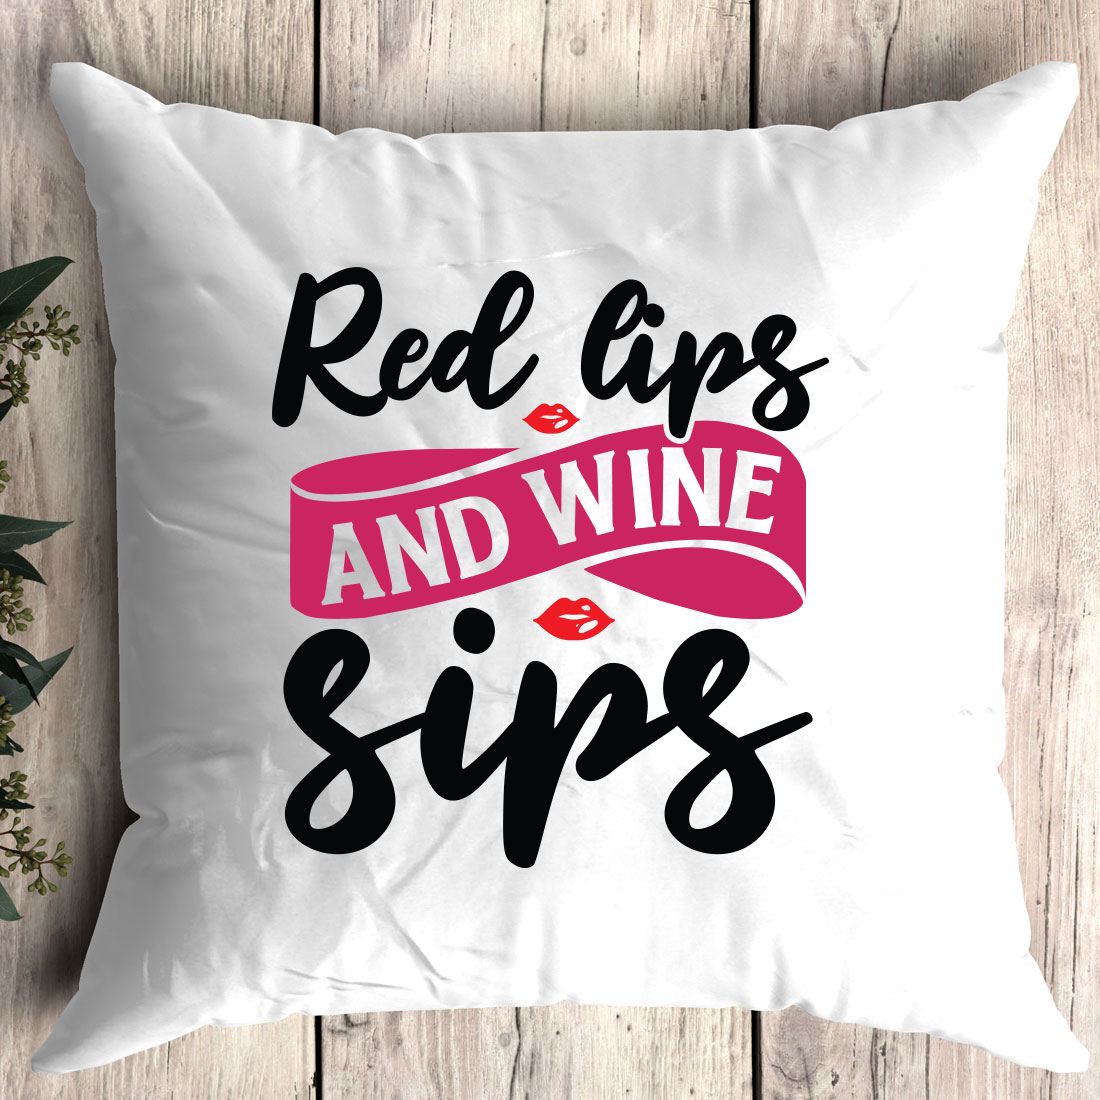 Pillow that says red lips and wine sips.